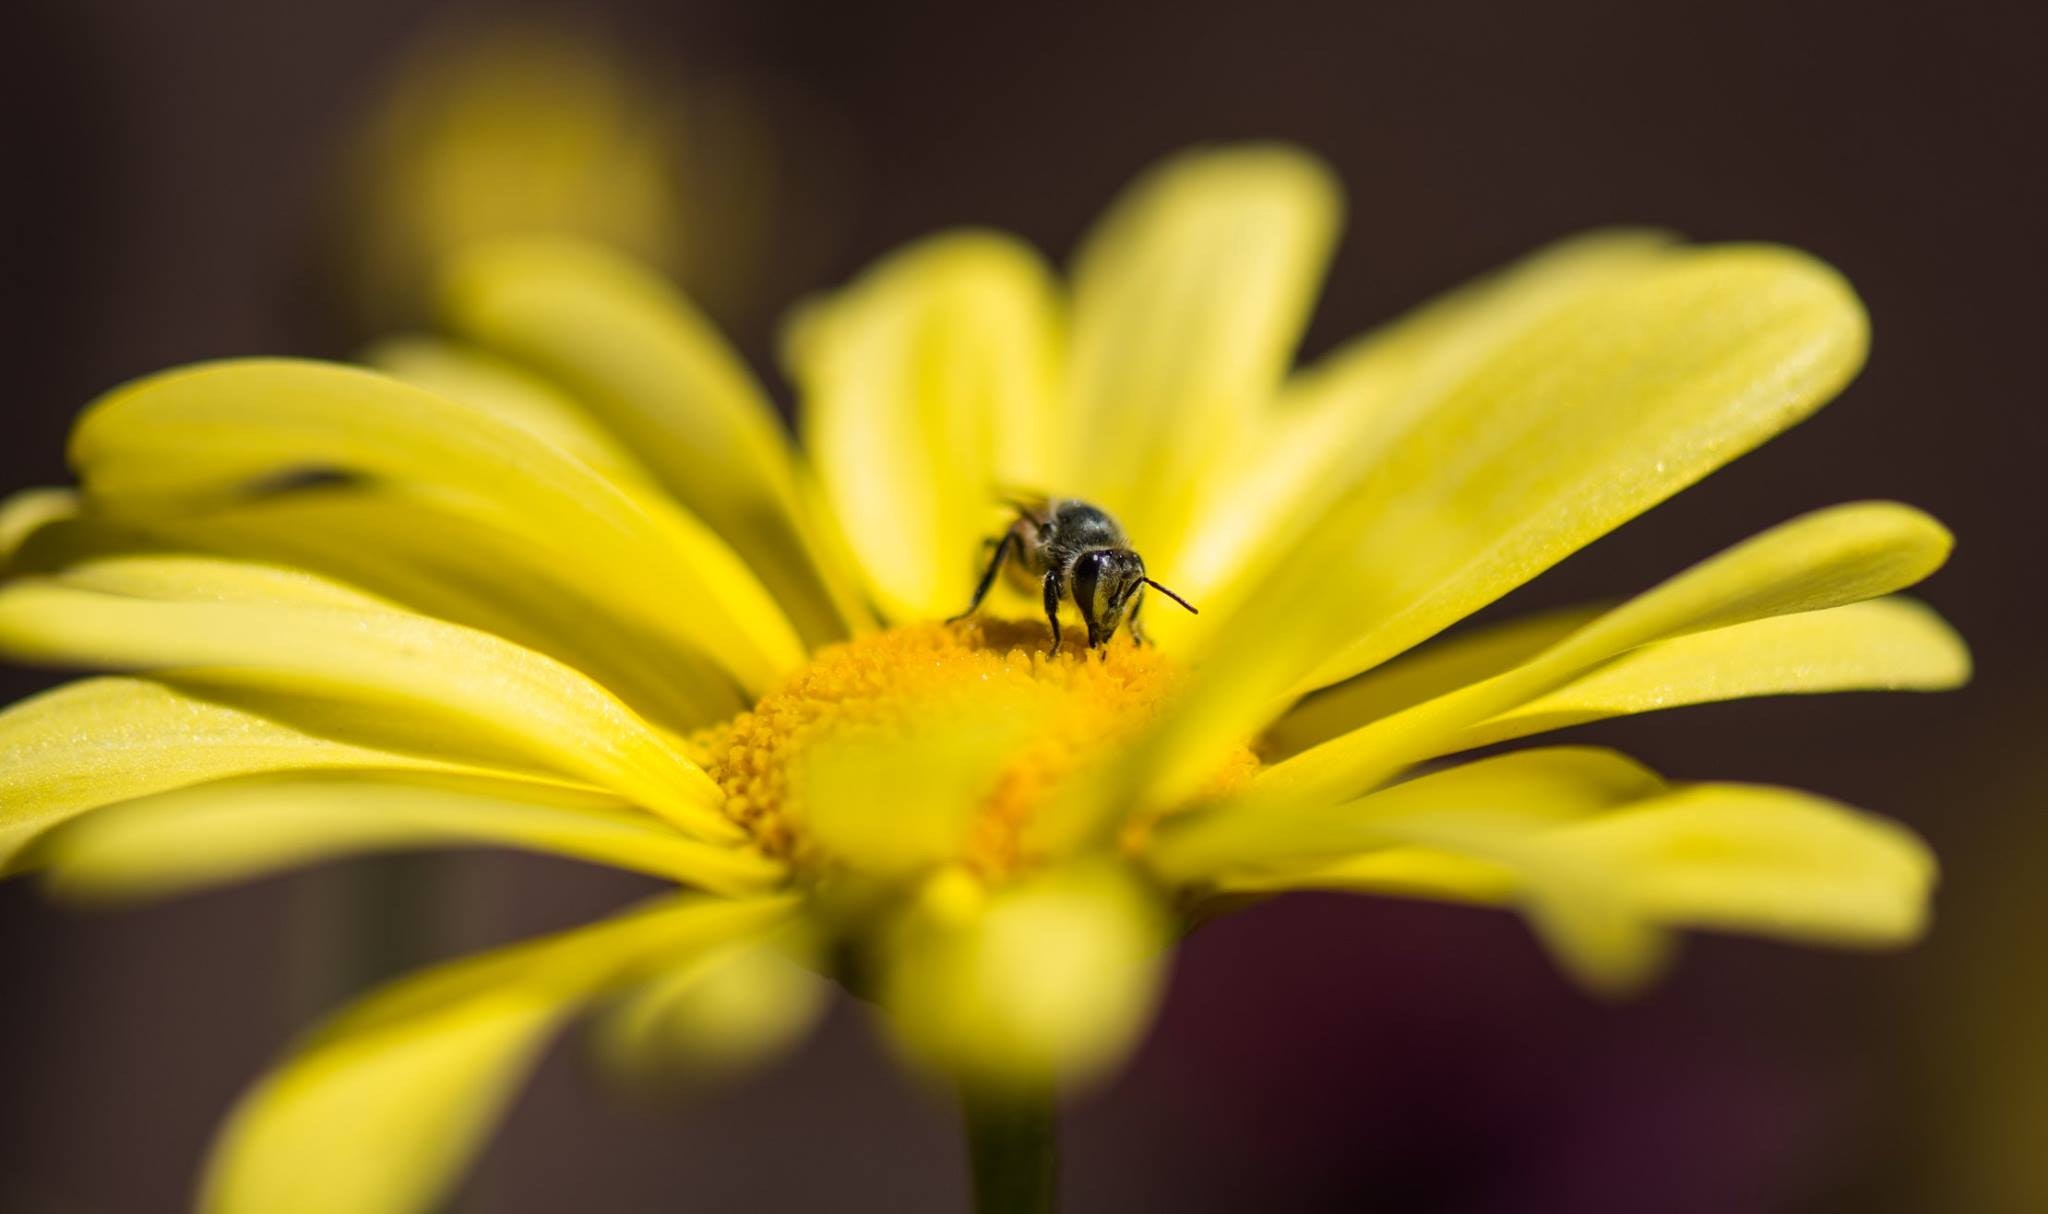 Honeybee Perched on Yellow Petaled Flower in Closeup Photo, Bee, Insect, Summer, Pollination, HQ Photo